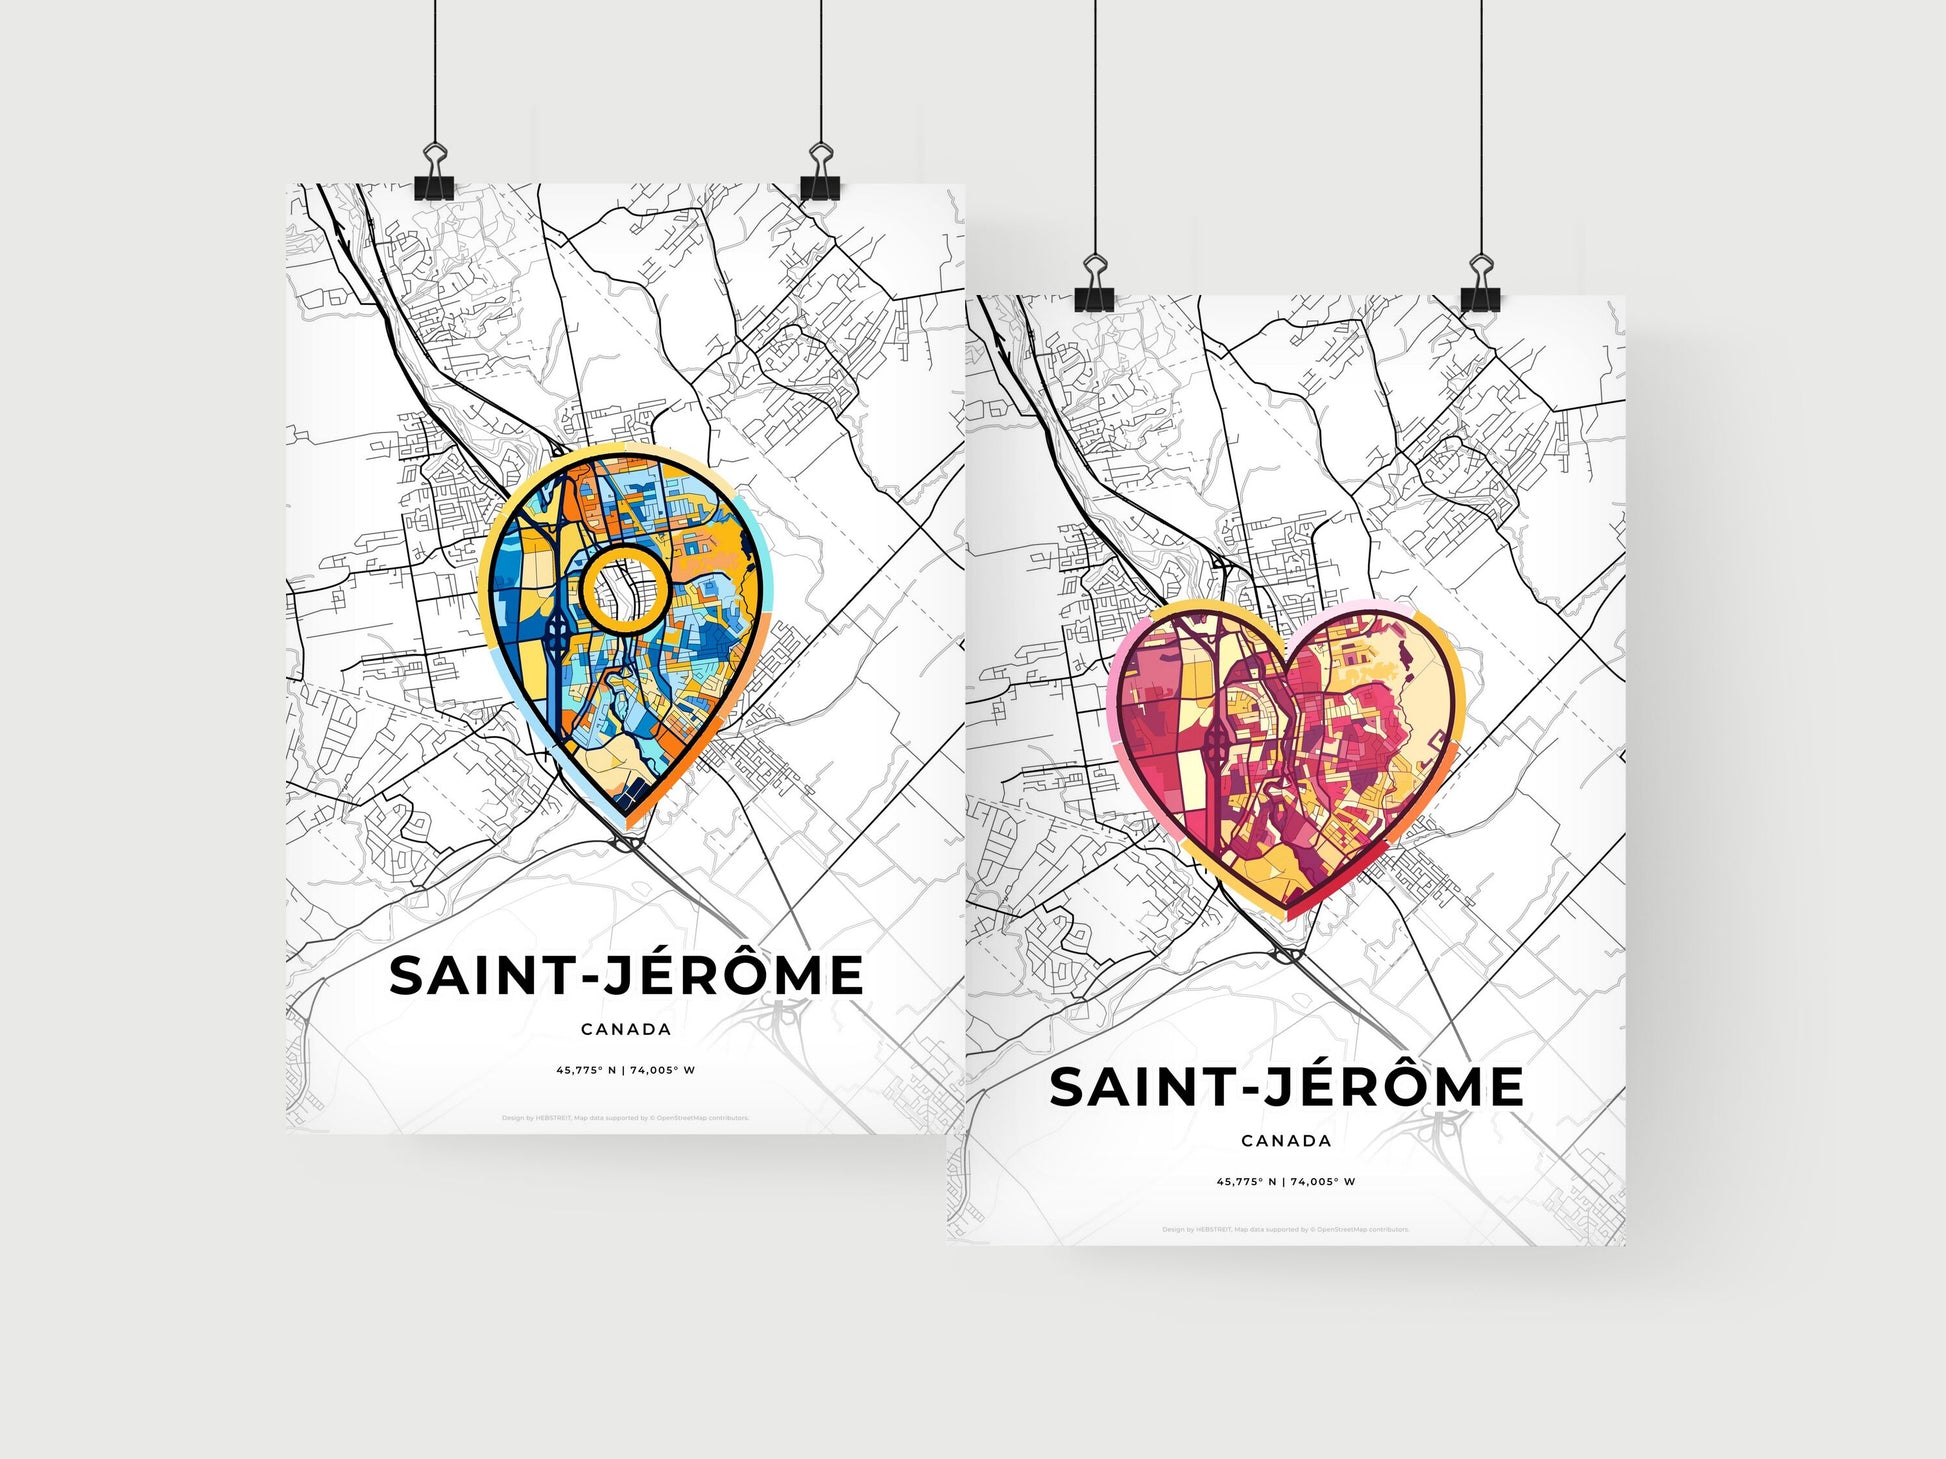 SAINT-JÉRÔME CANADA minimal art map with a colorful icon.